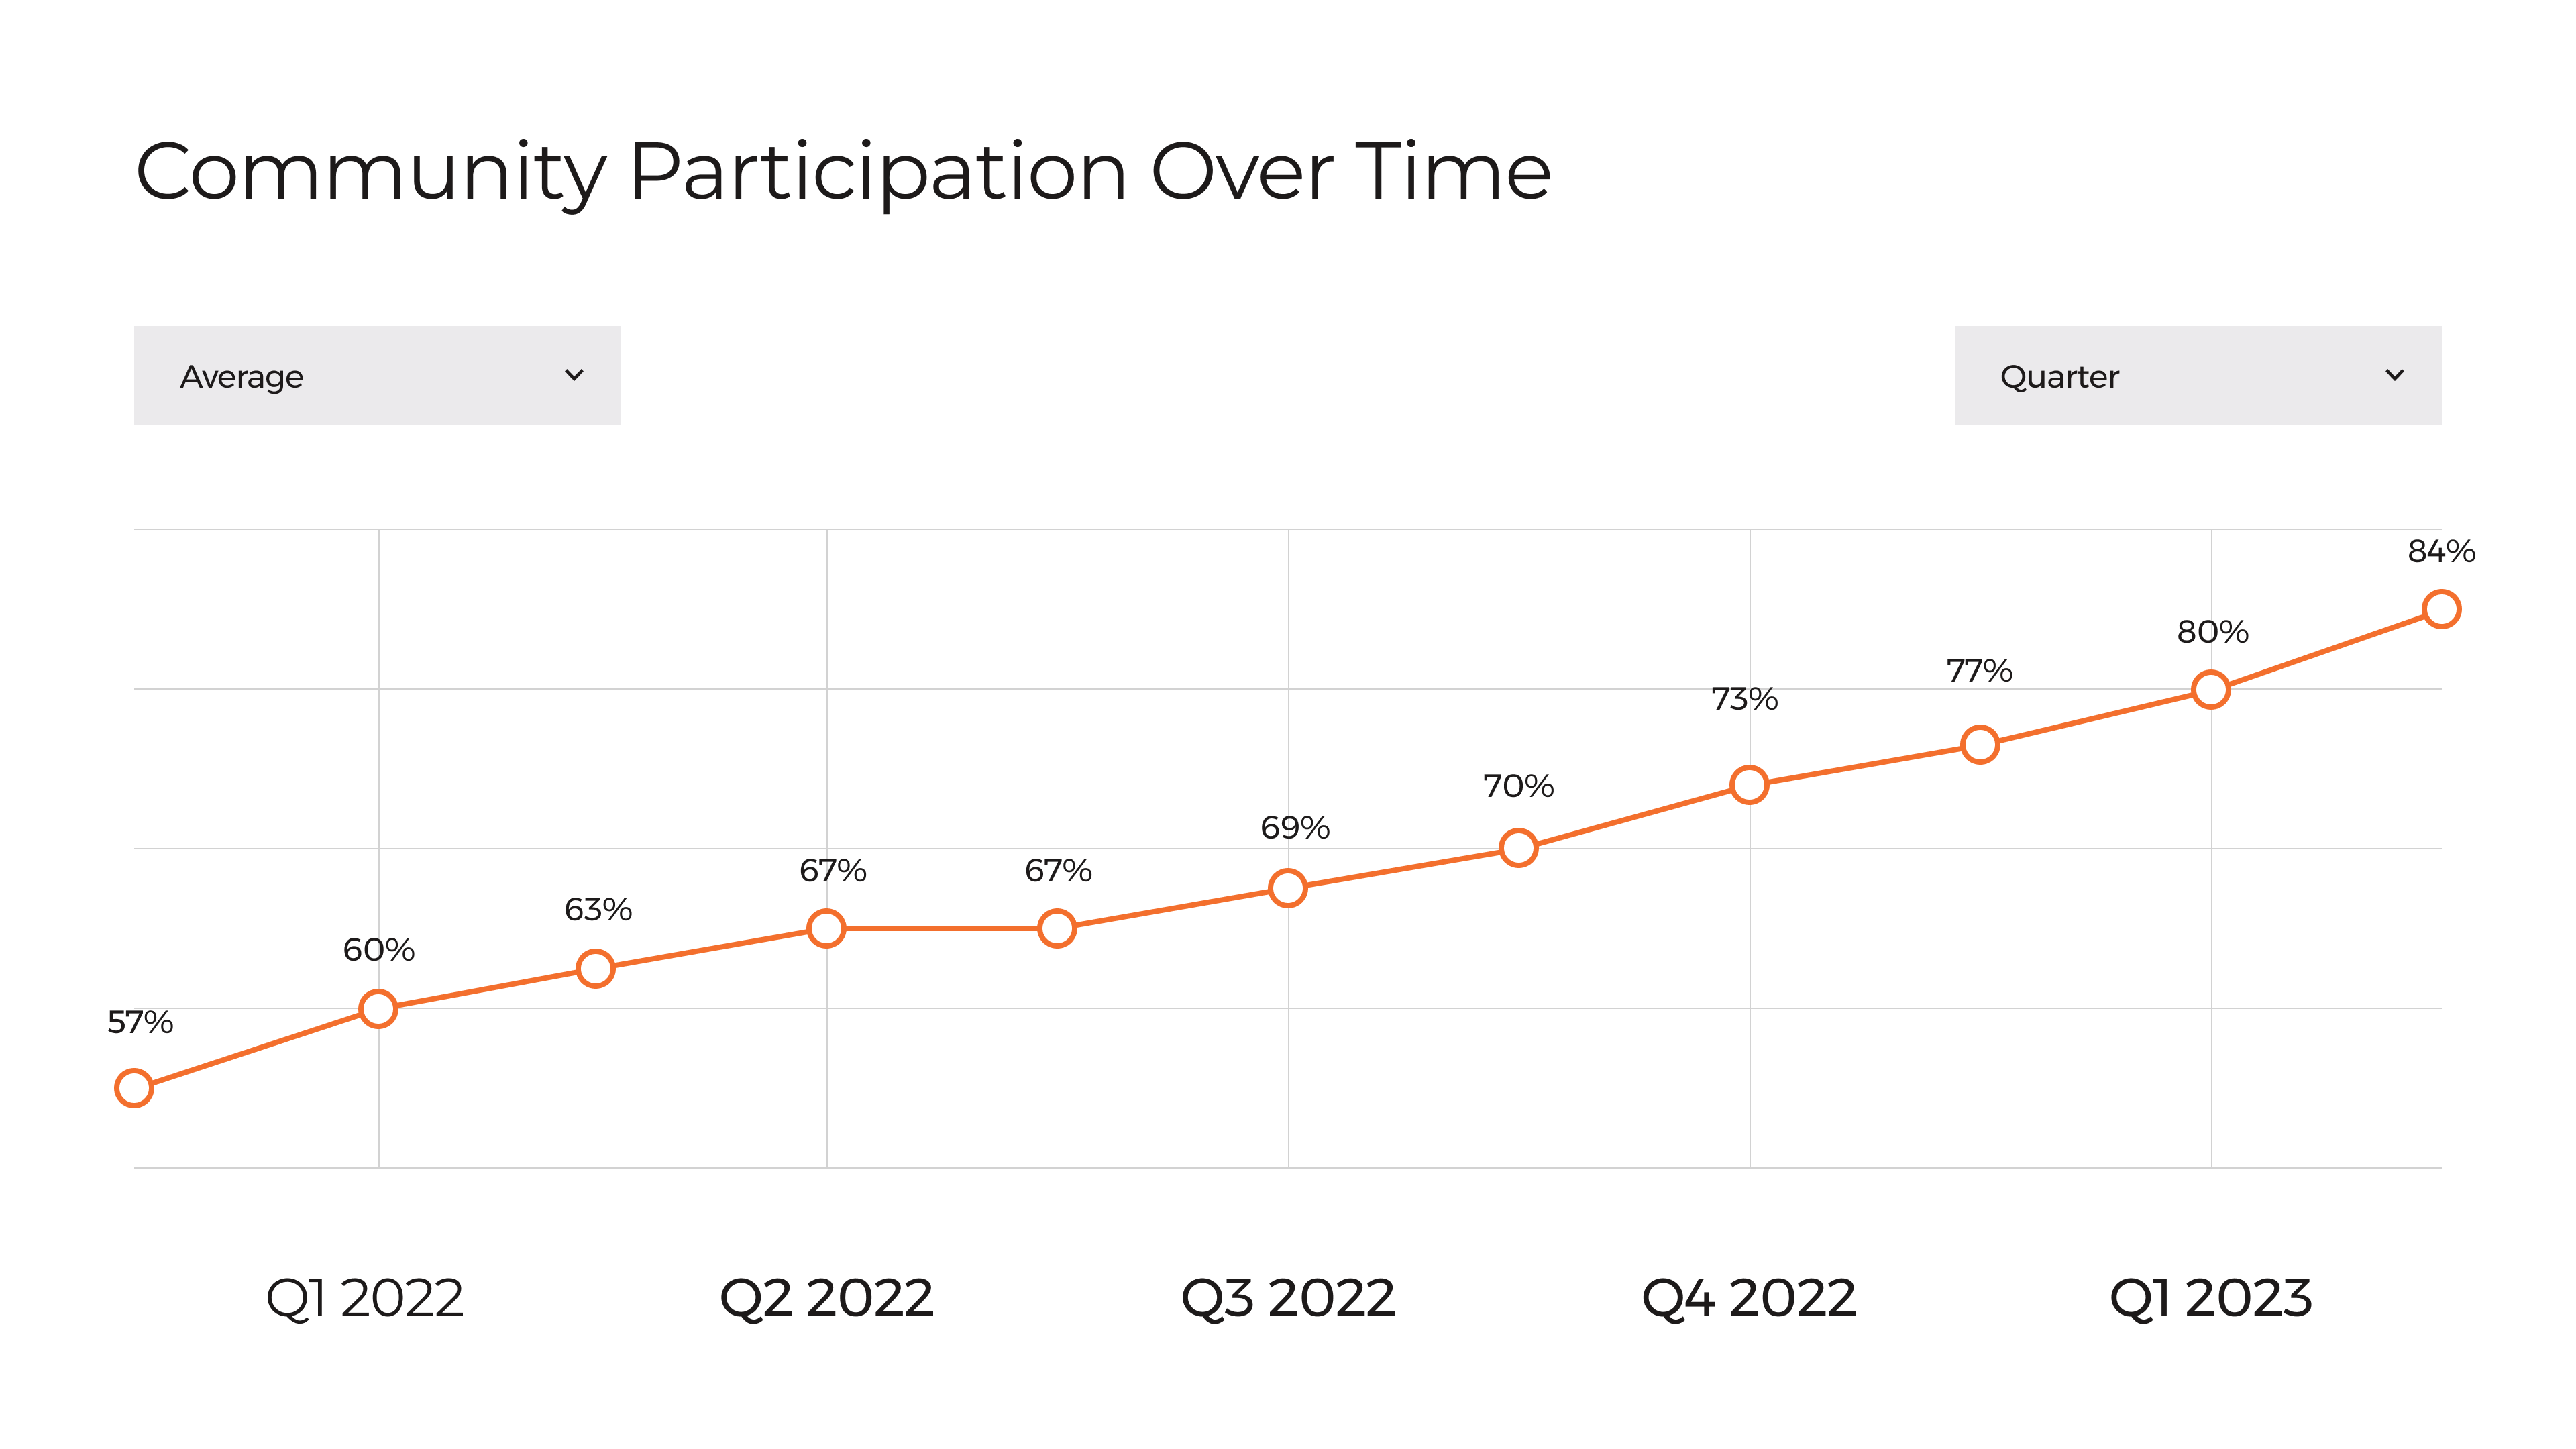 Community participation graph showing increase over time